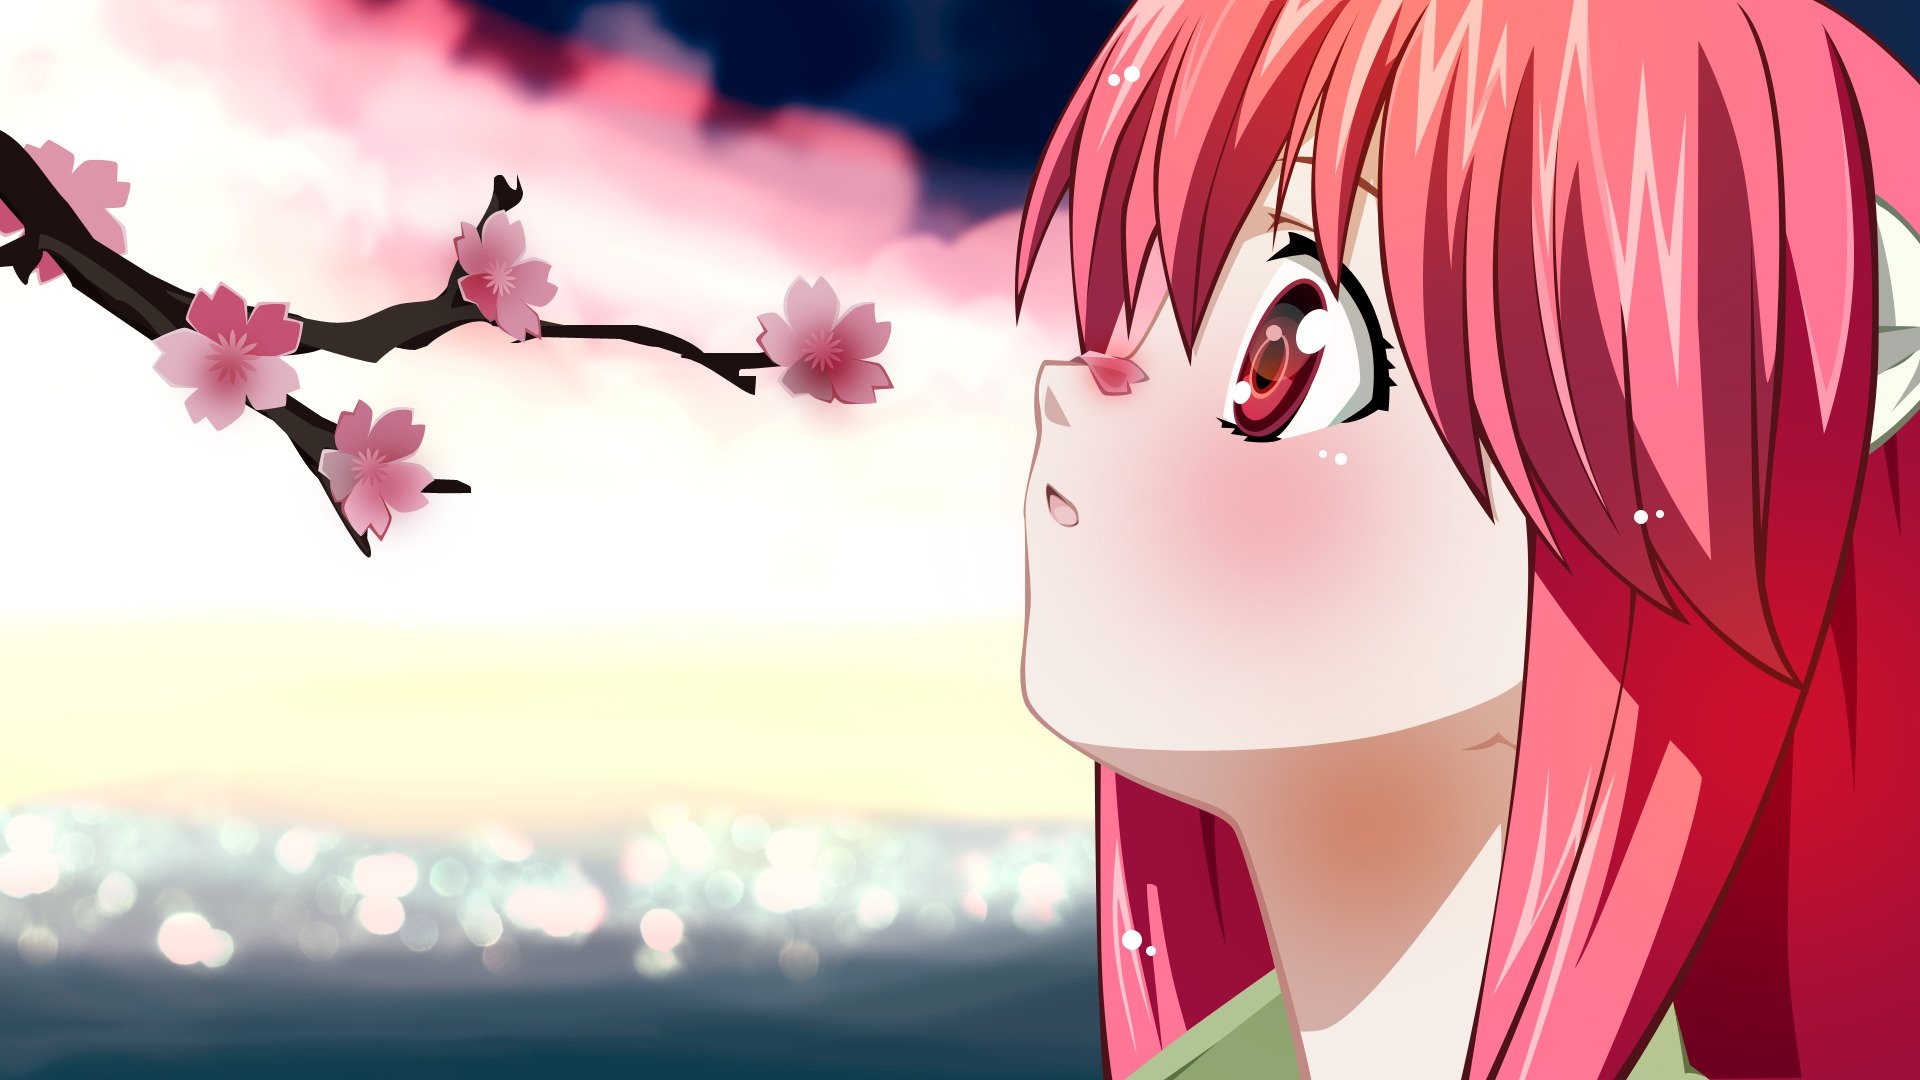 Elfen Lied, Anime, Lucy, Anime girls, Cherry blossom, Pink hair Wallpaper